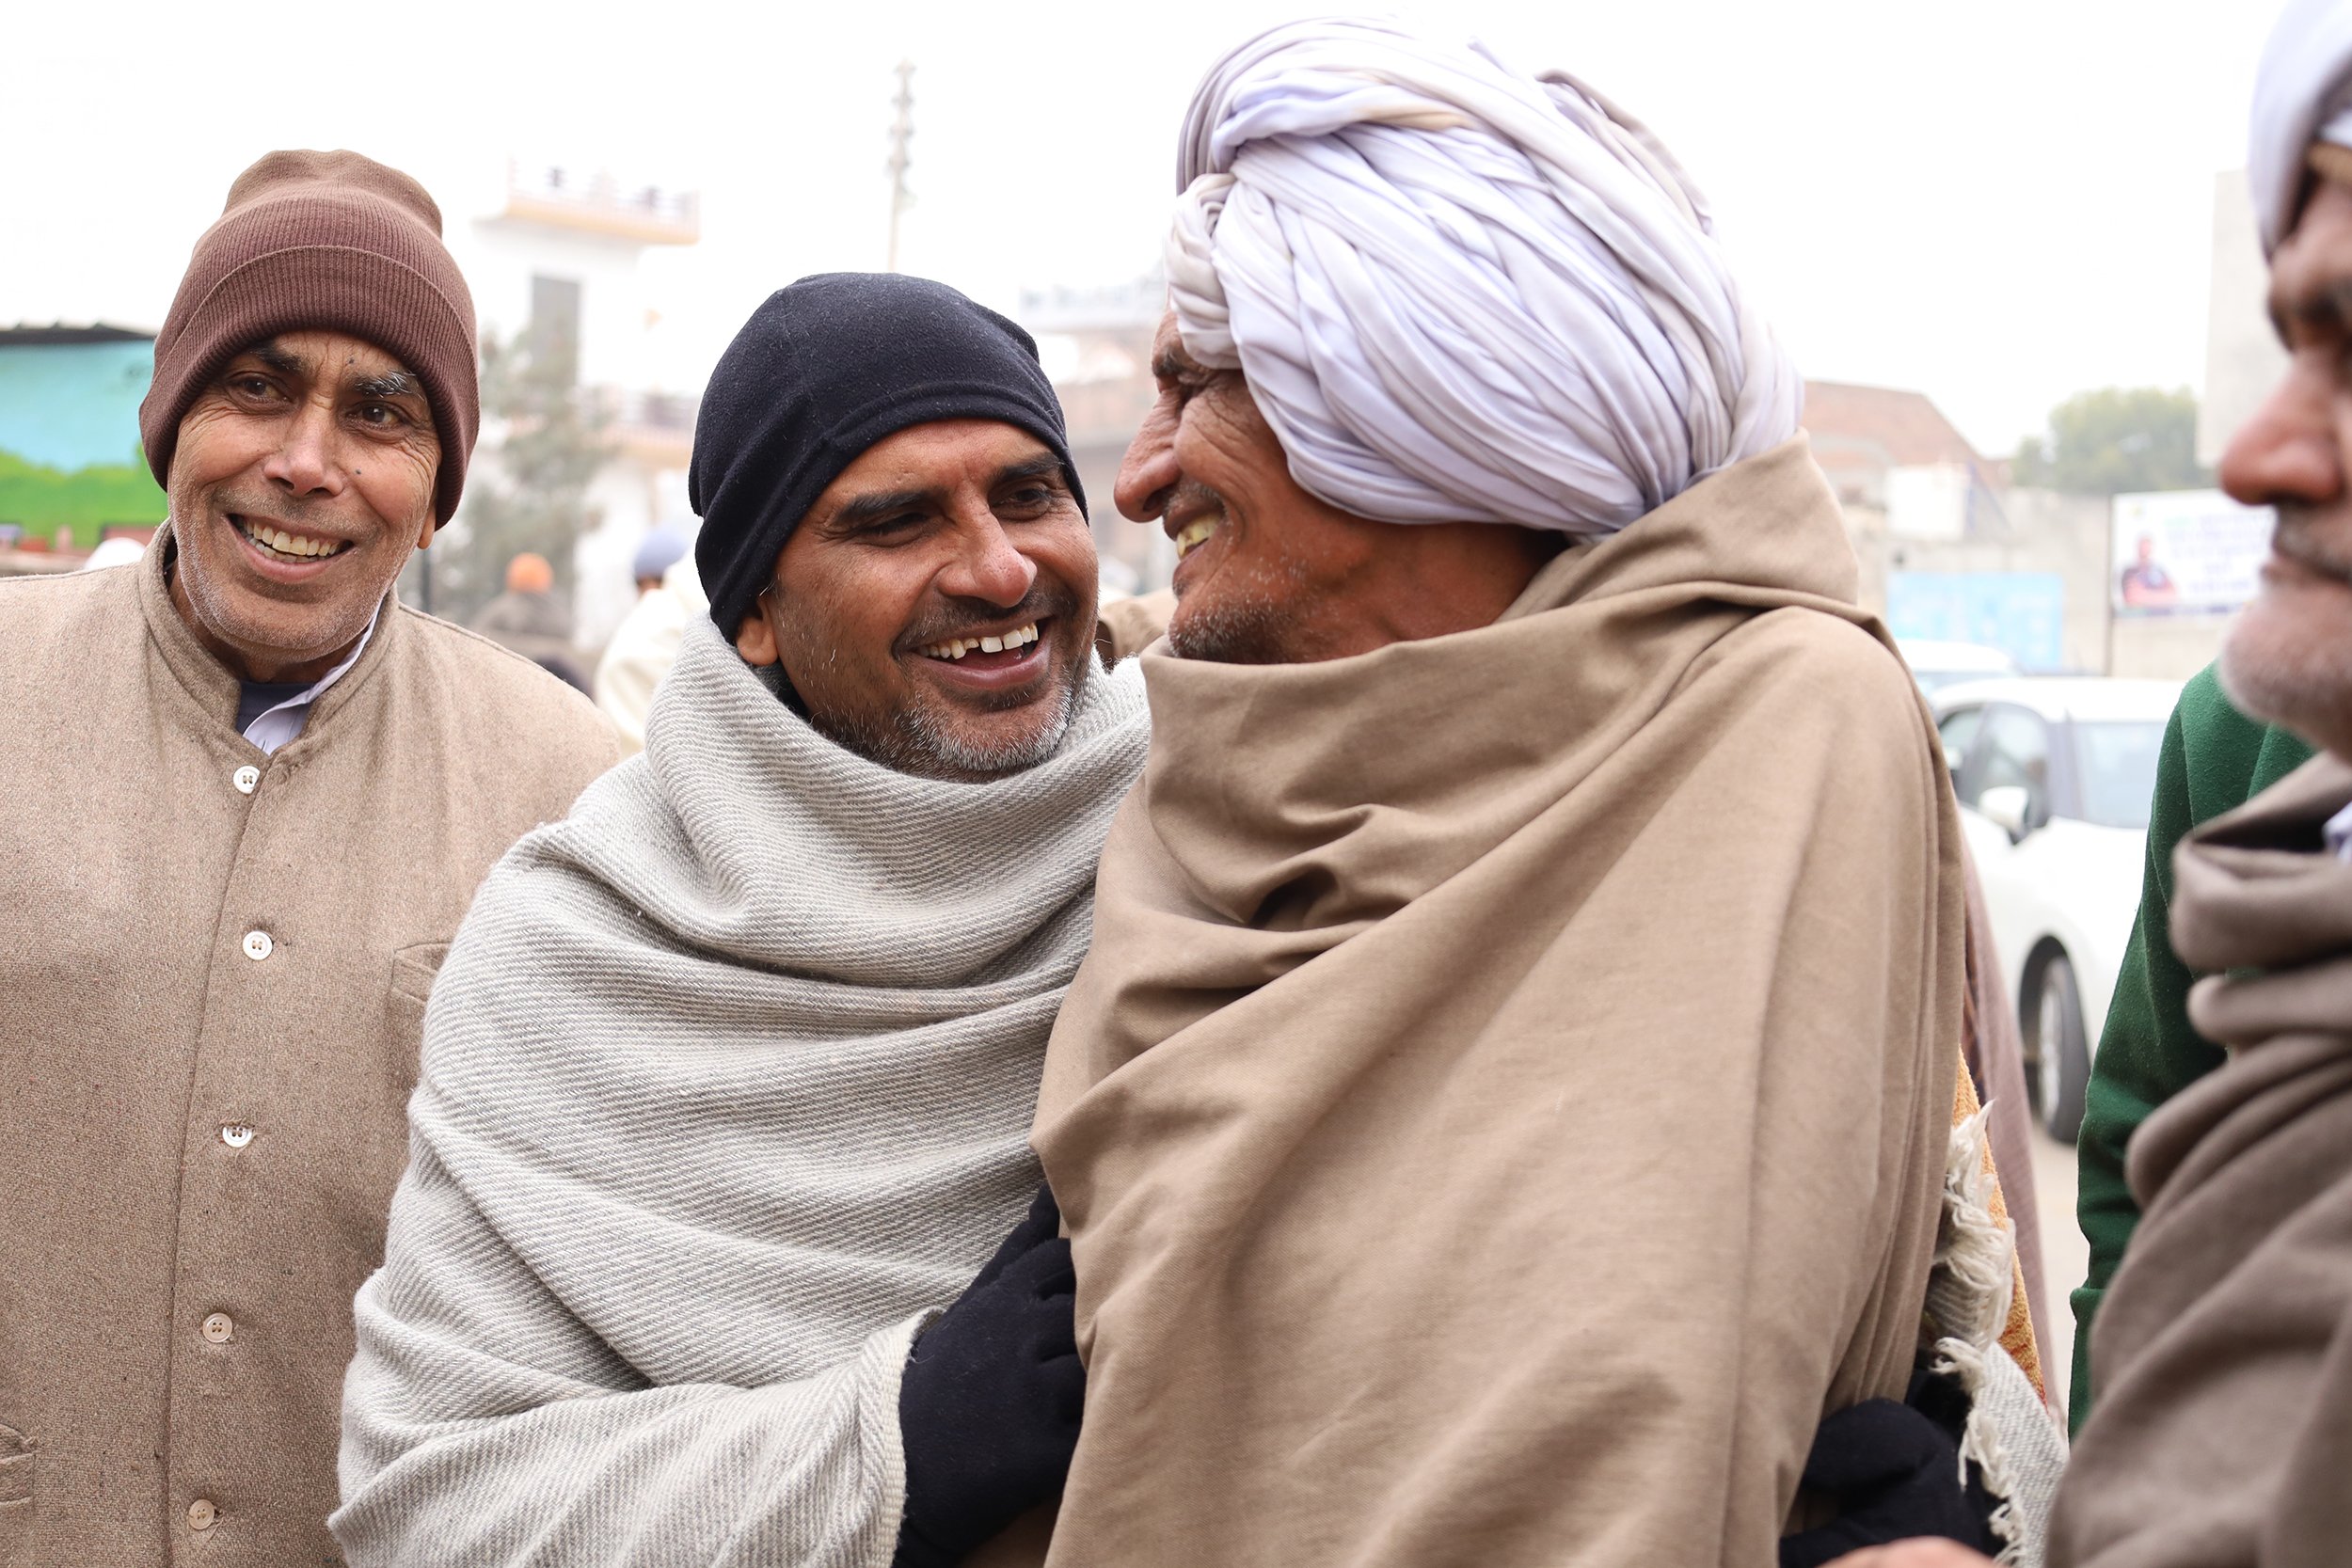  Jassi jokes with friends on a farmers’ union election morning in Harsola. Jassi spent much of his morning talking to men before they voted, putting in a final good word for his uncle, Hukmi Dhull, who ran and won. “The best moments for me have been 